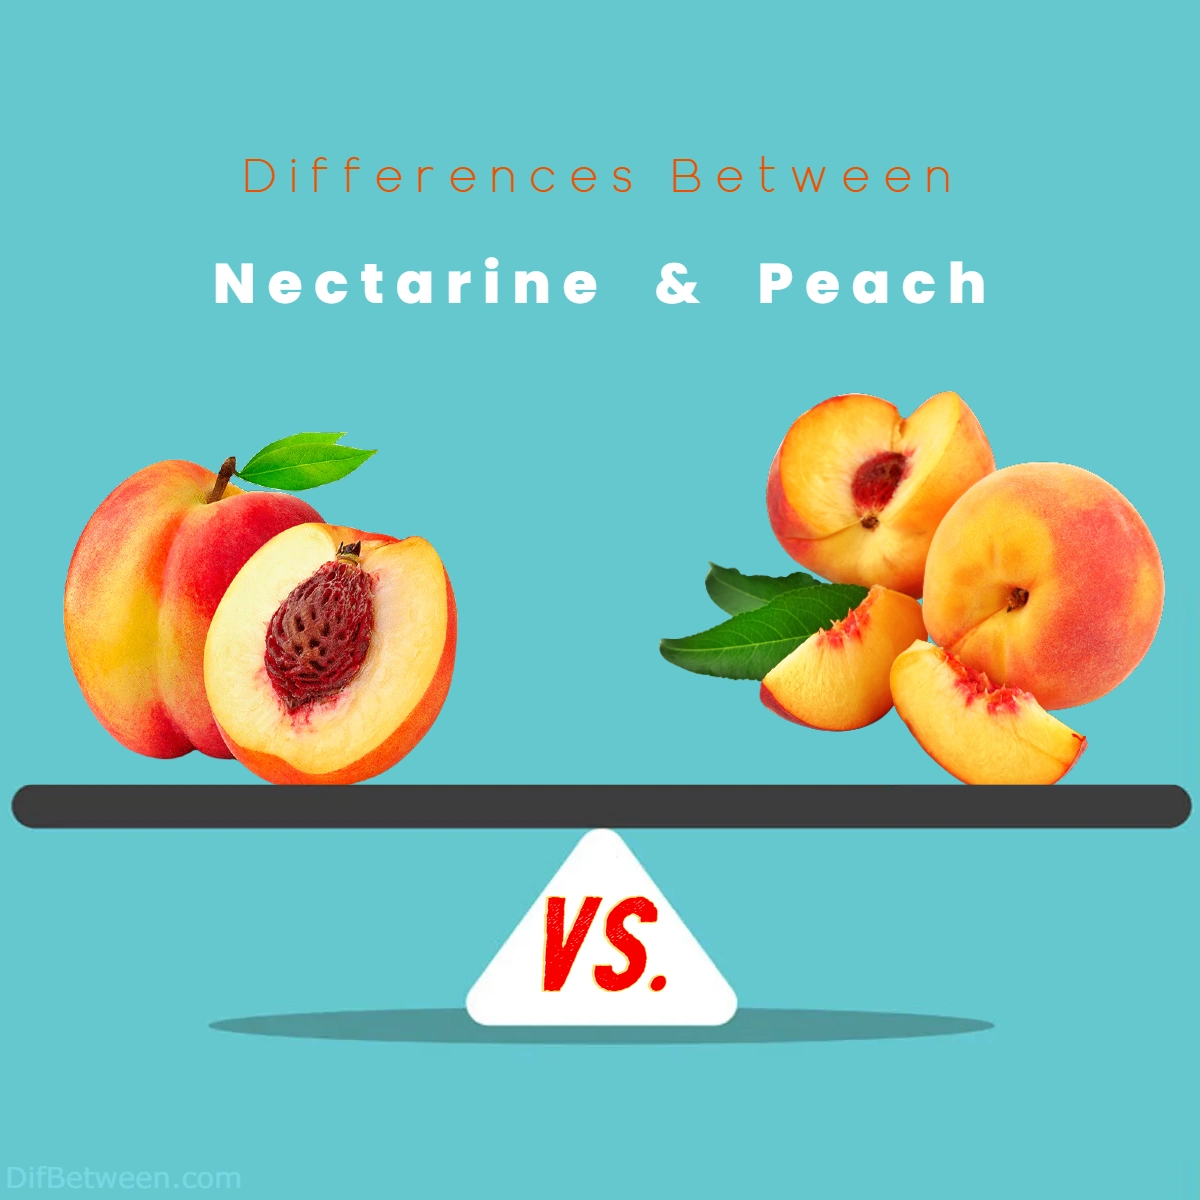 Difference Between Nectarine and Peach